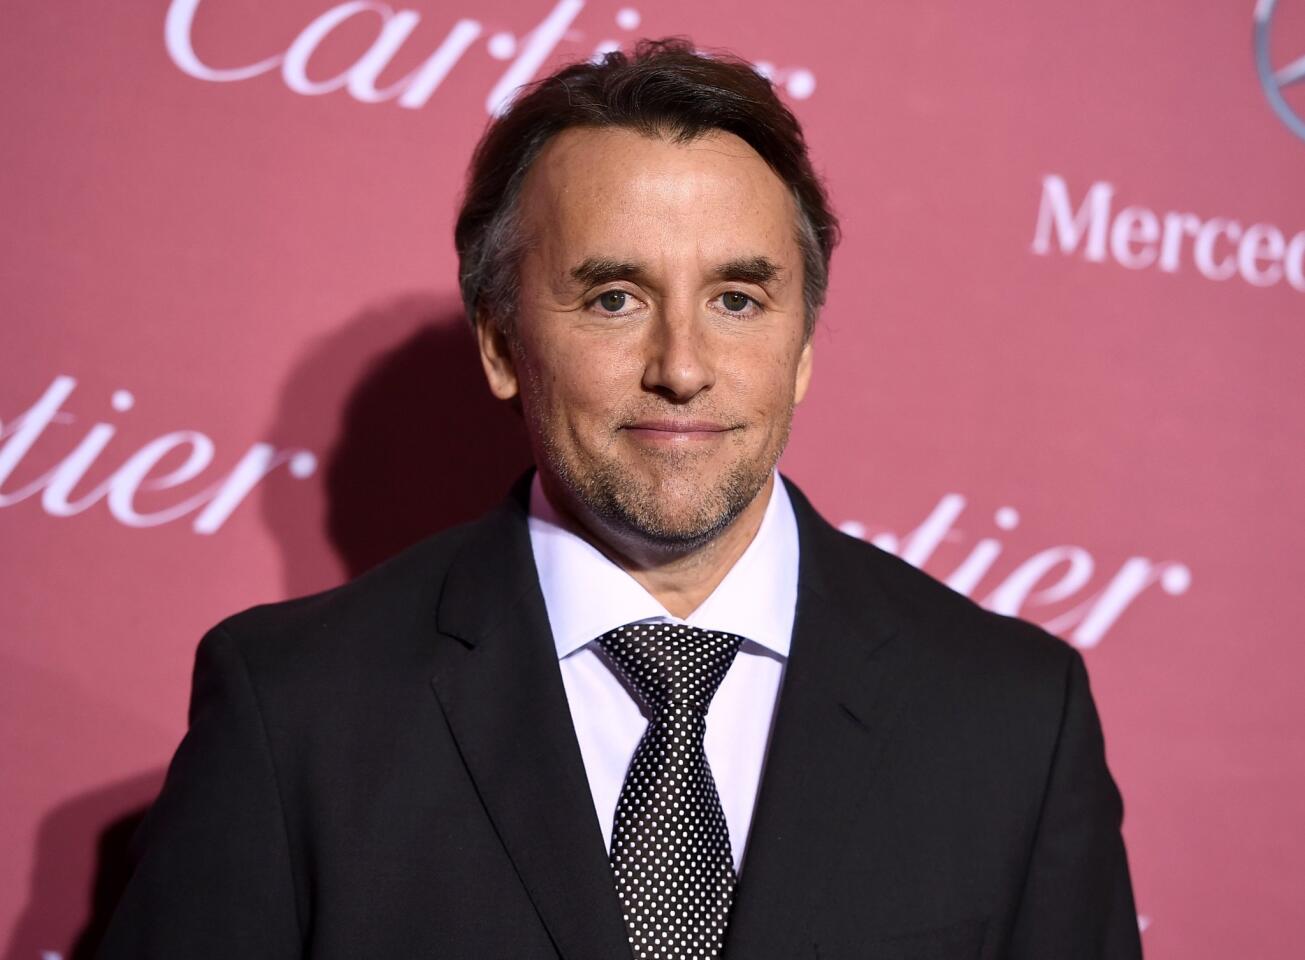 Best Director Will win: Richard Linklater, "Boyhood" Should win: Richard Linklater, "Boyhood" The lowdown: Some were taken aback by the inclusion of Morten Tyldum ("The Imitation Game") and Bennett Miller ("Foxcatcher"), i.e. no nomination for "American Sniper" director Clint Eastwood.